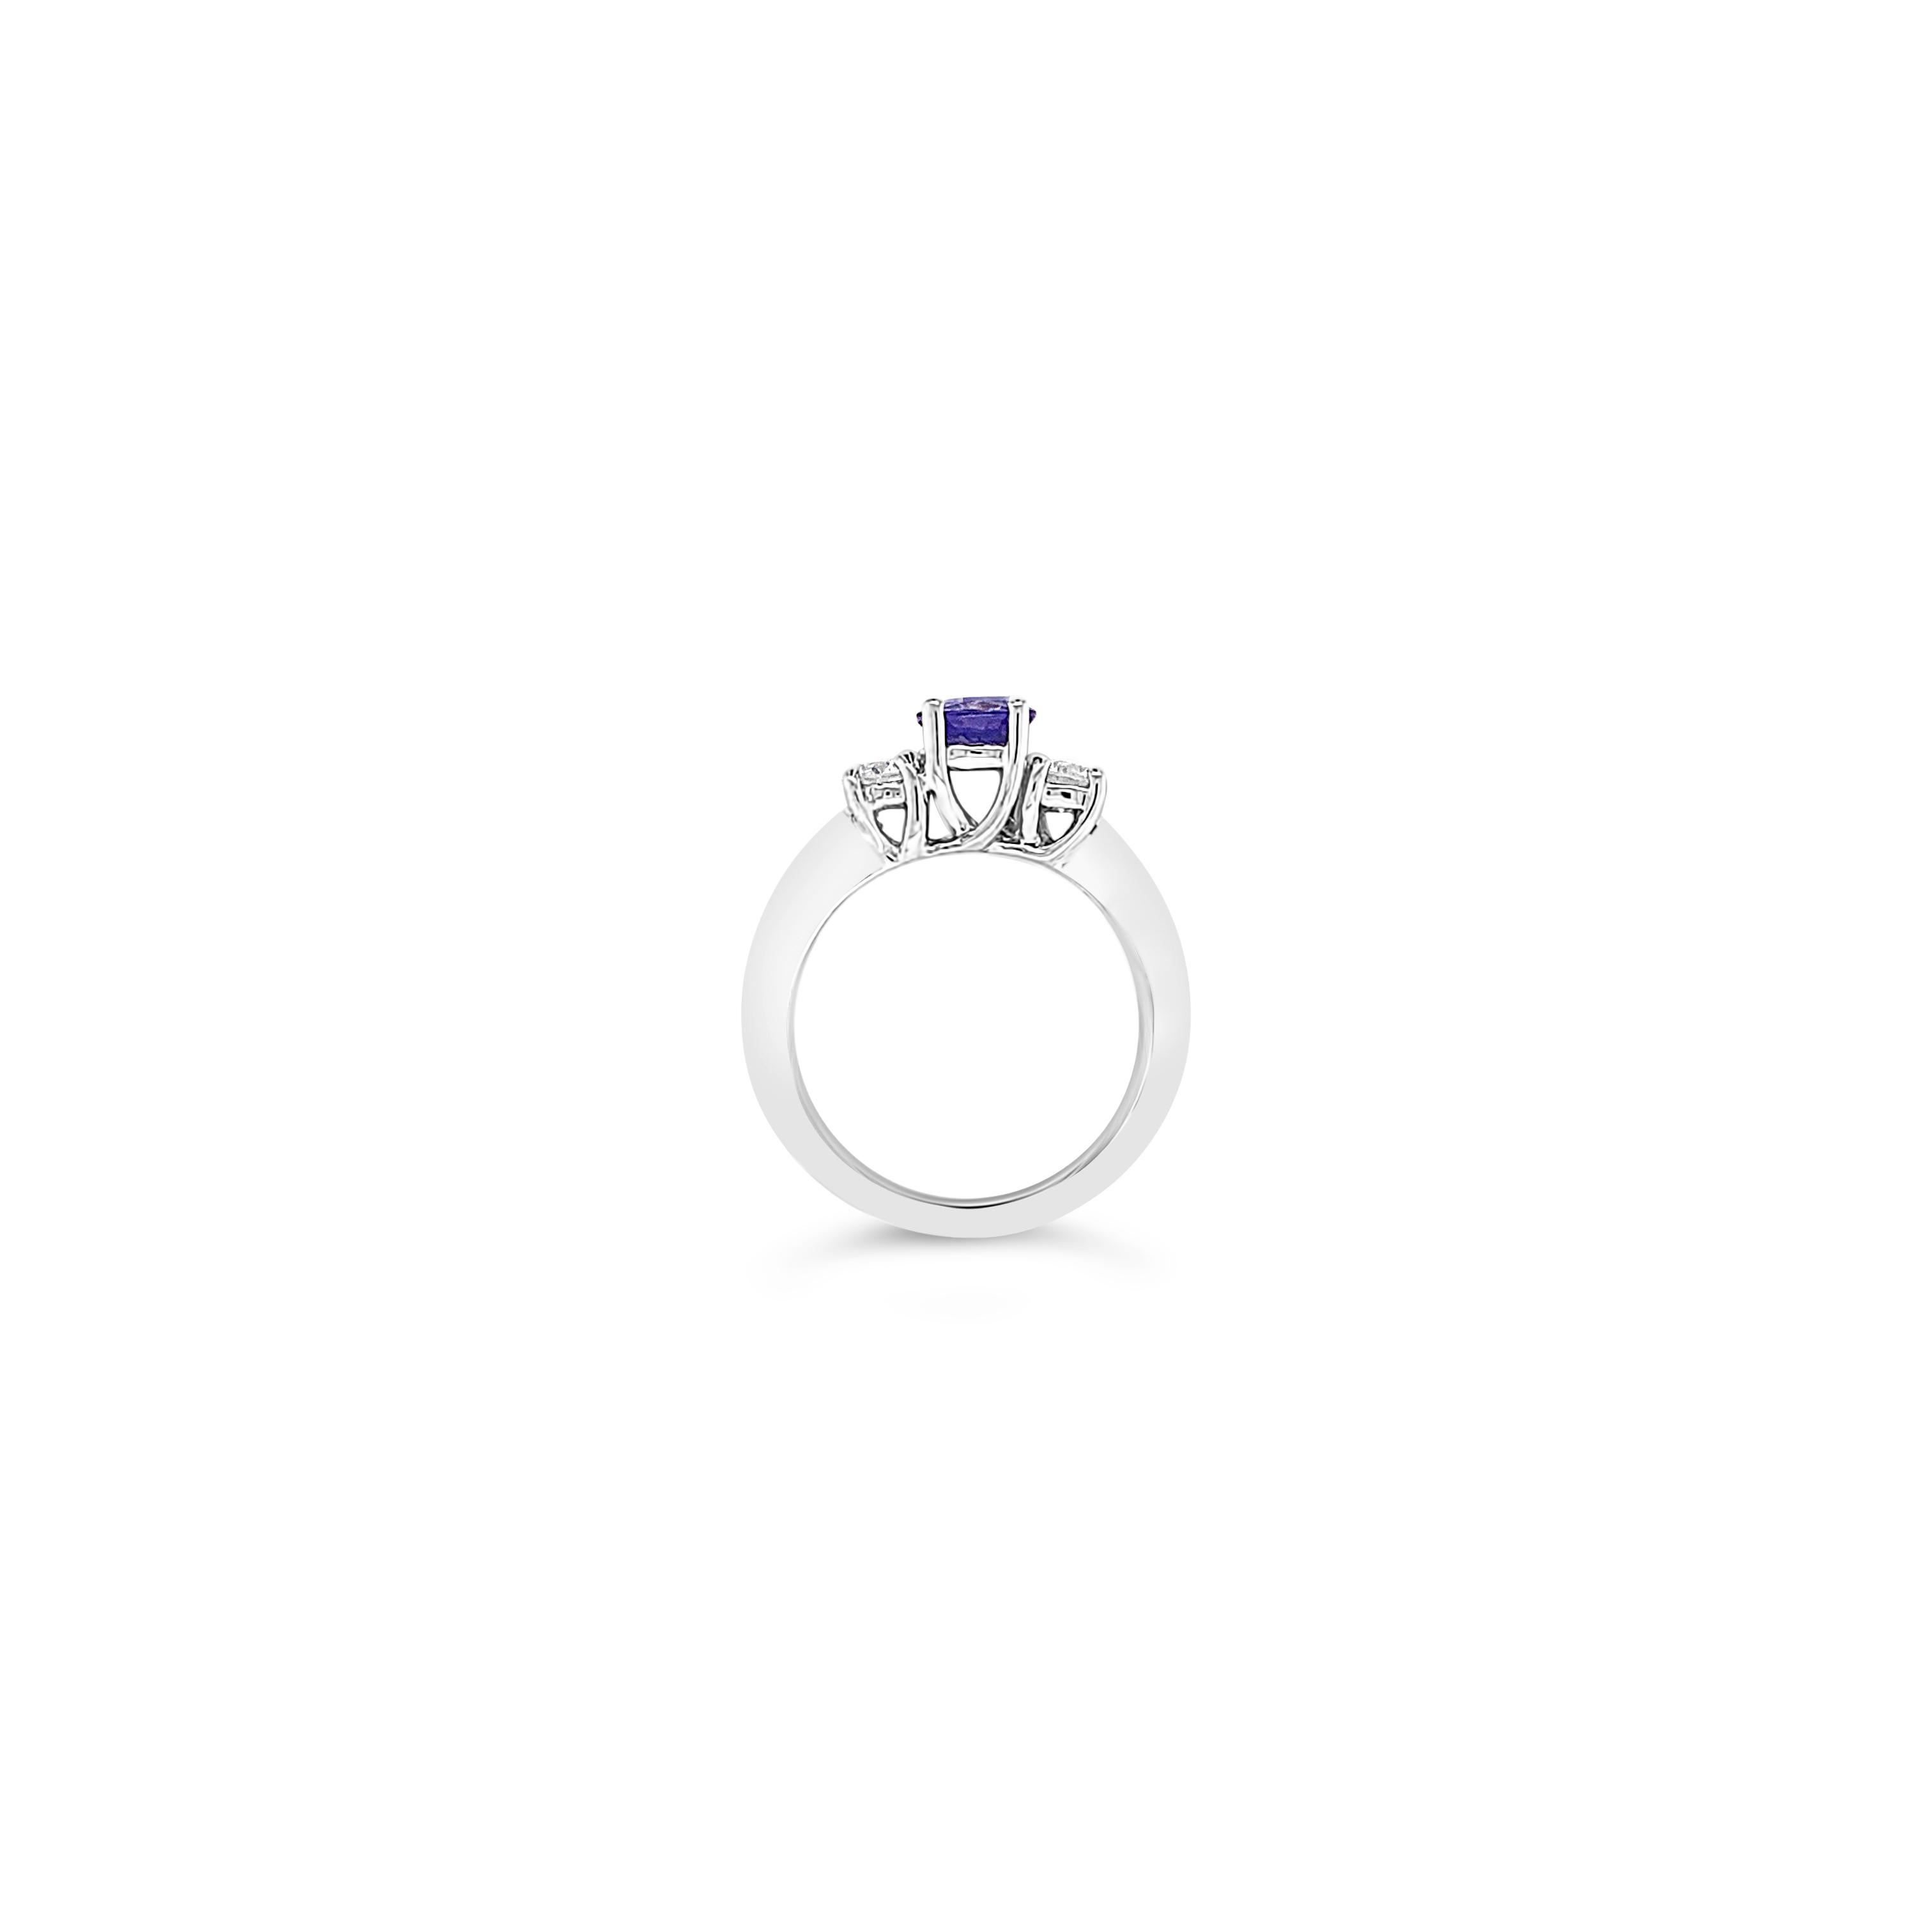 Grand Sample Sale Ring featuring 5/8 cts. Blueberry Tanzanite®, 3/8 cts. Vanilla Diamonds® set in 14K Vanilla Gold®. Please feel free to reach out with any questions! Item comes with a Le Vian Grand Sample Sale™ jewelry box as well as a Le Vian®